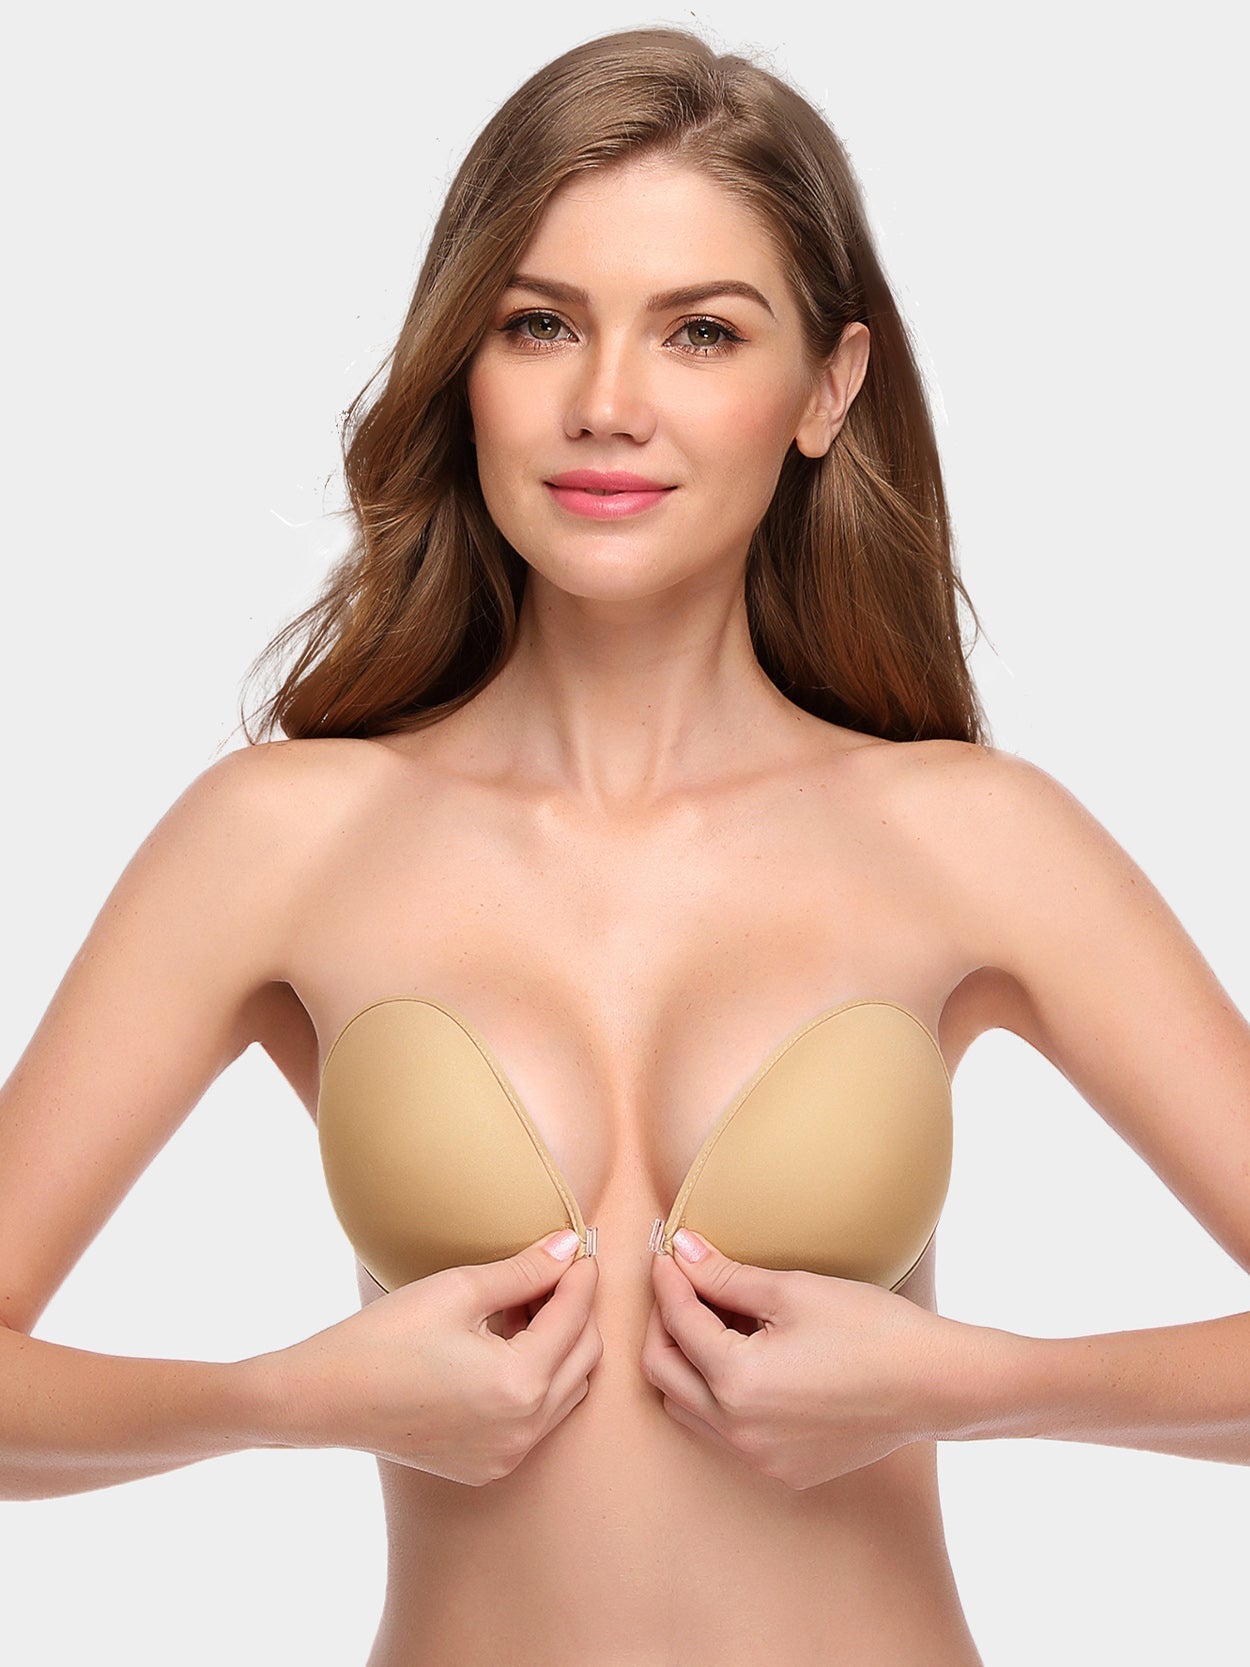 Adhesive Push-up Reusable Self Silicone Bra Inserts Pasty Bra Nude –  WingsLove